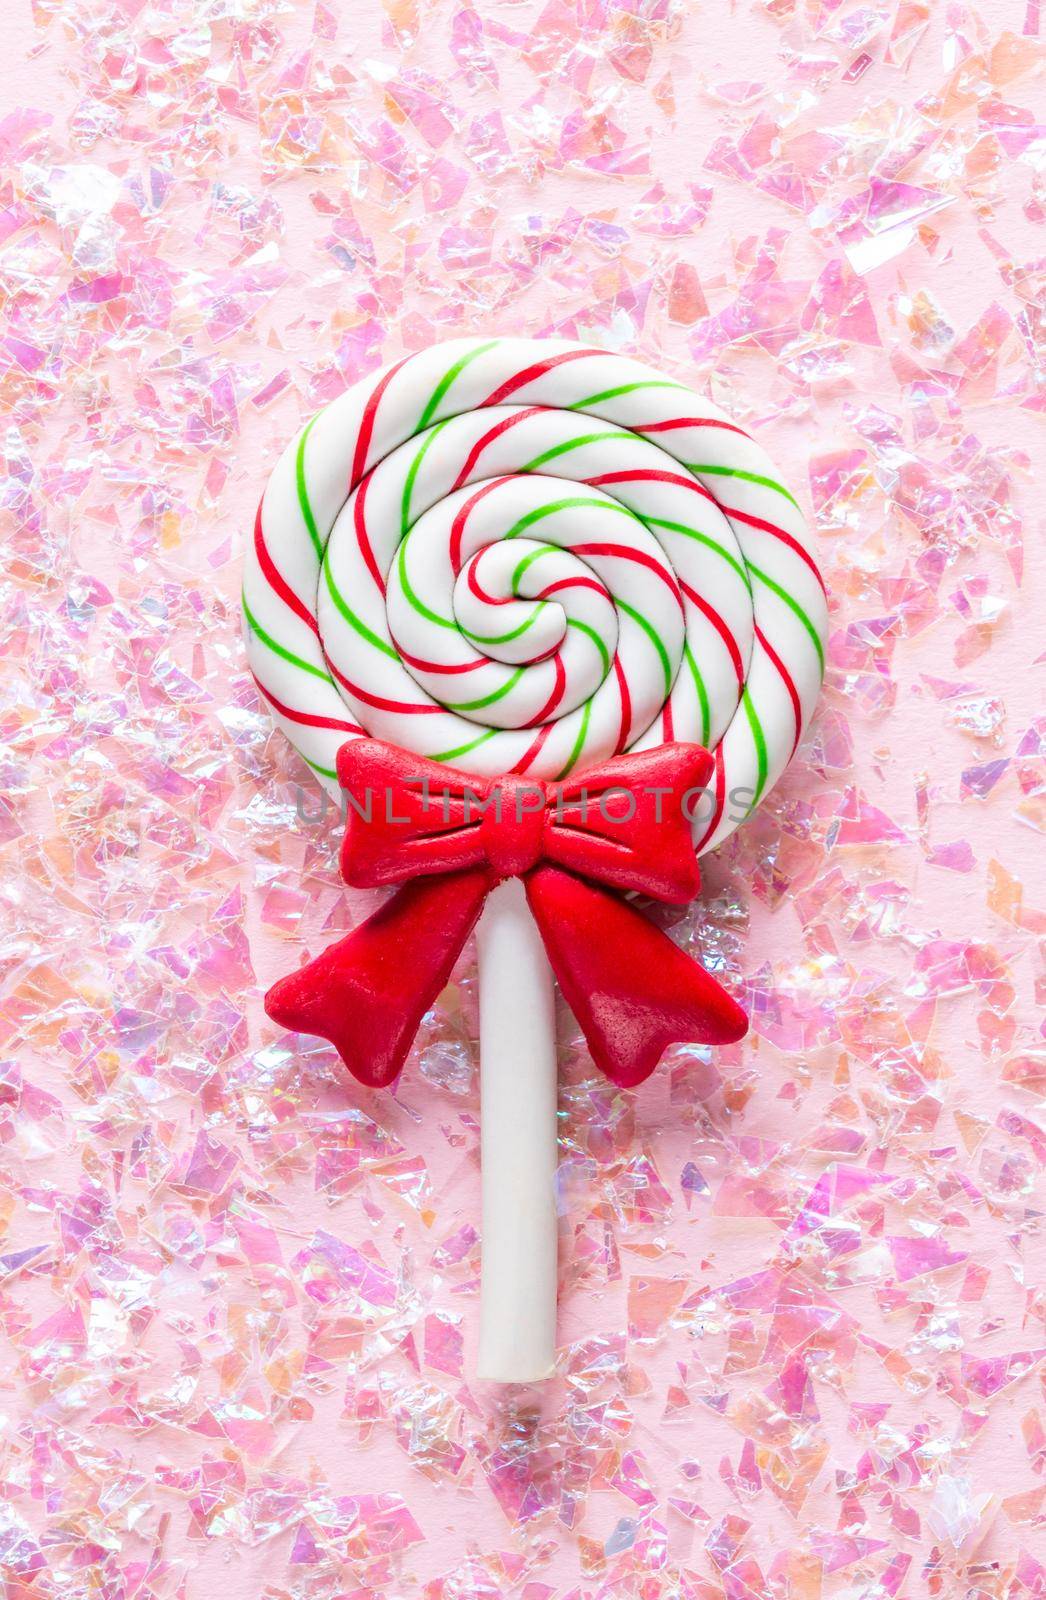 Lollipop On pink Background with shiny glitter with copy space by Mariakray